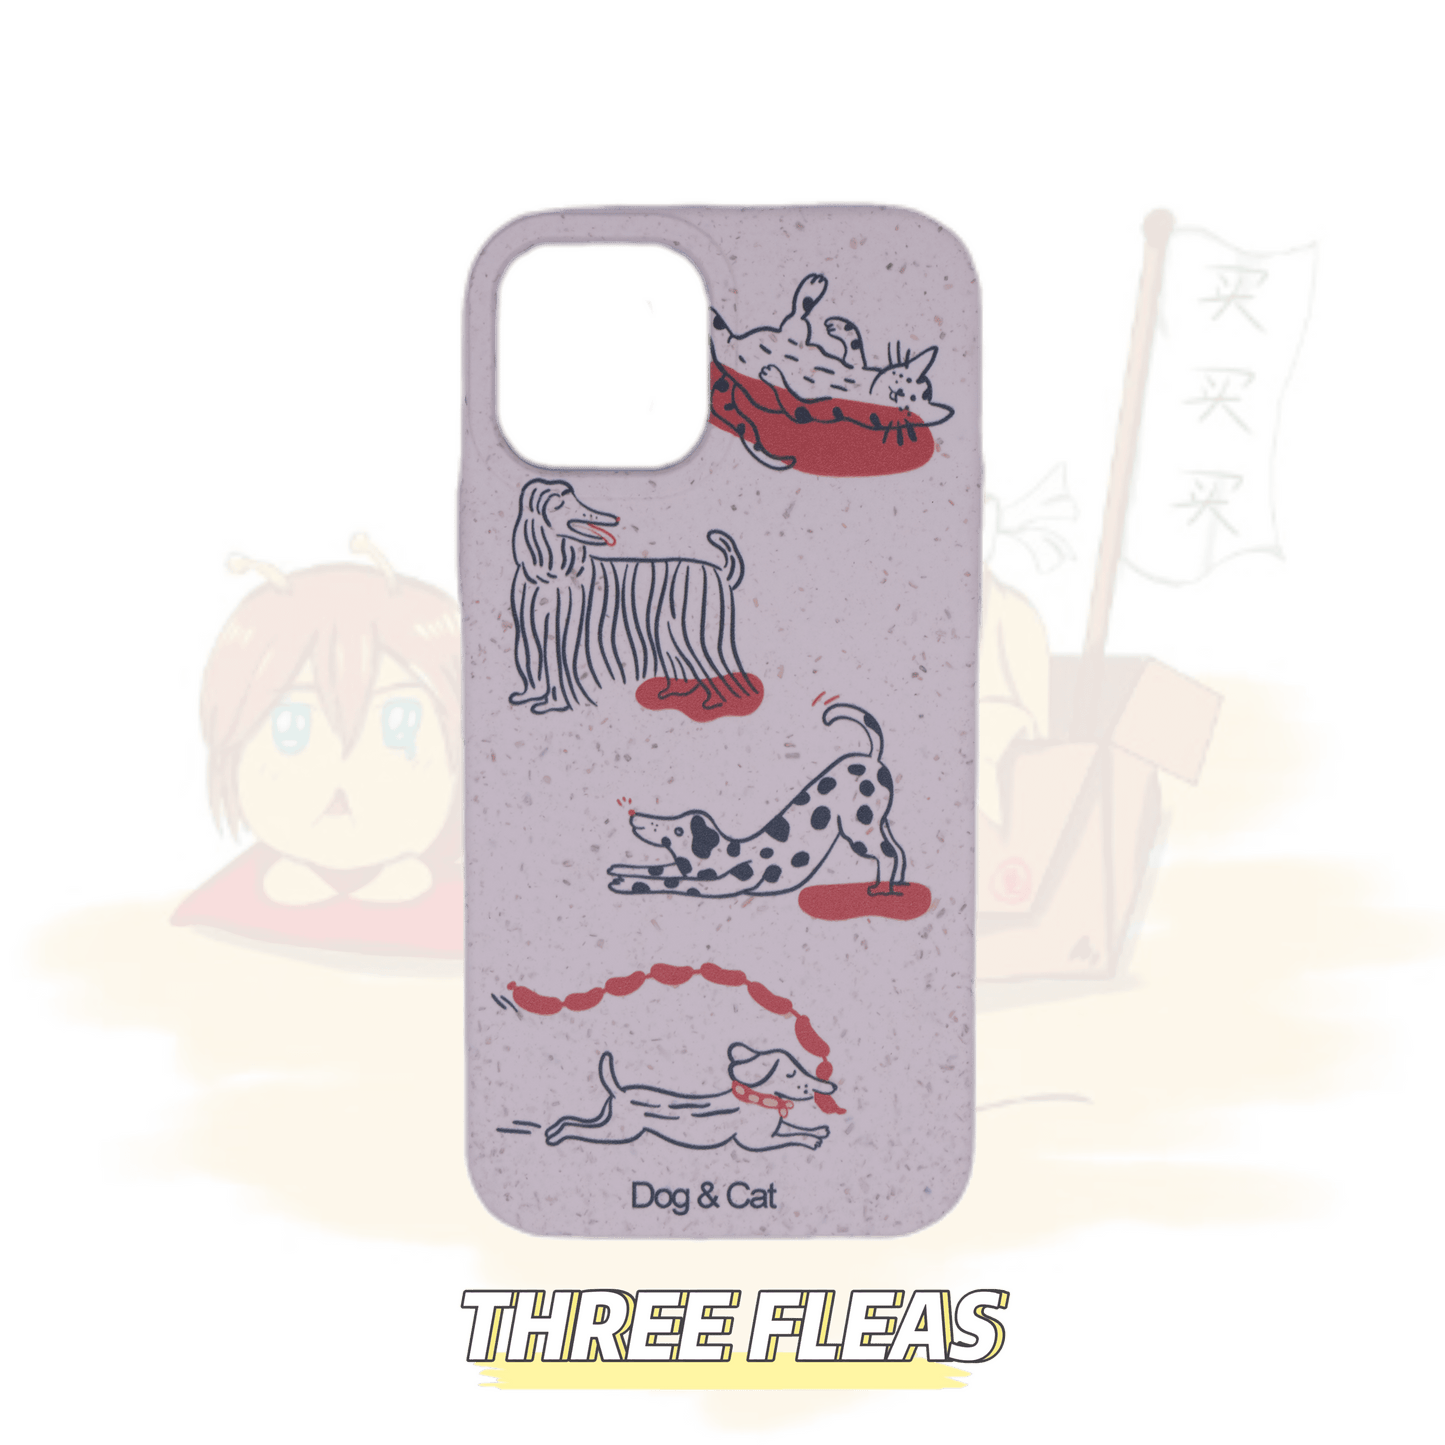 Cat and Dog degradable phone case